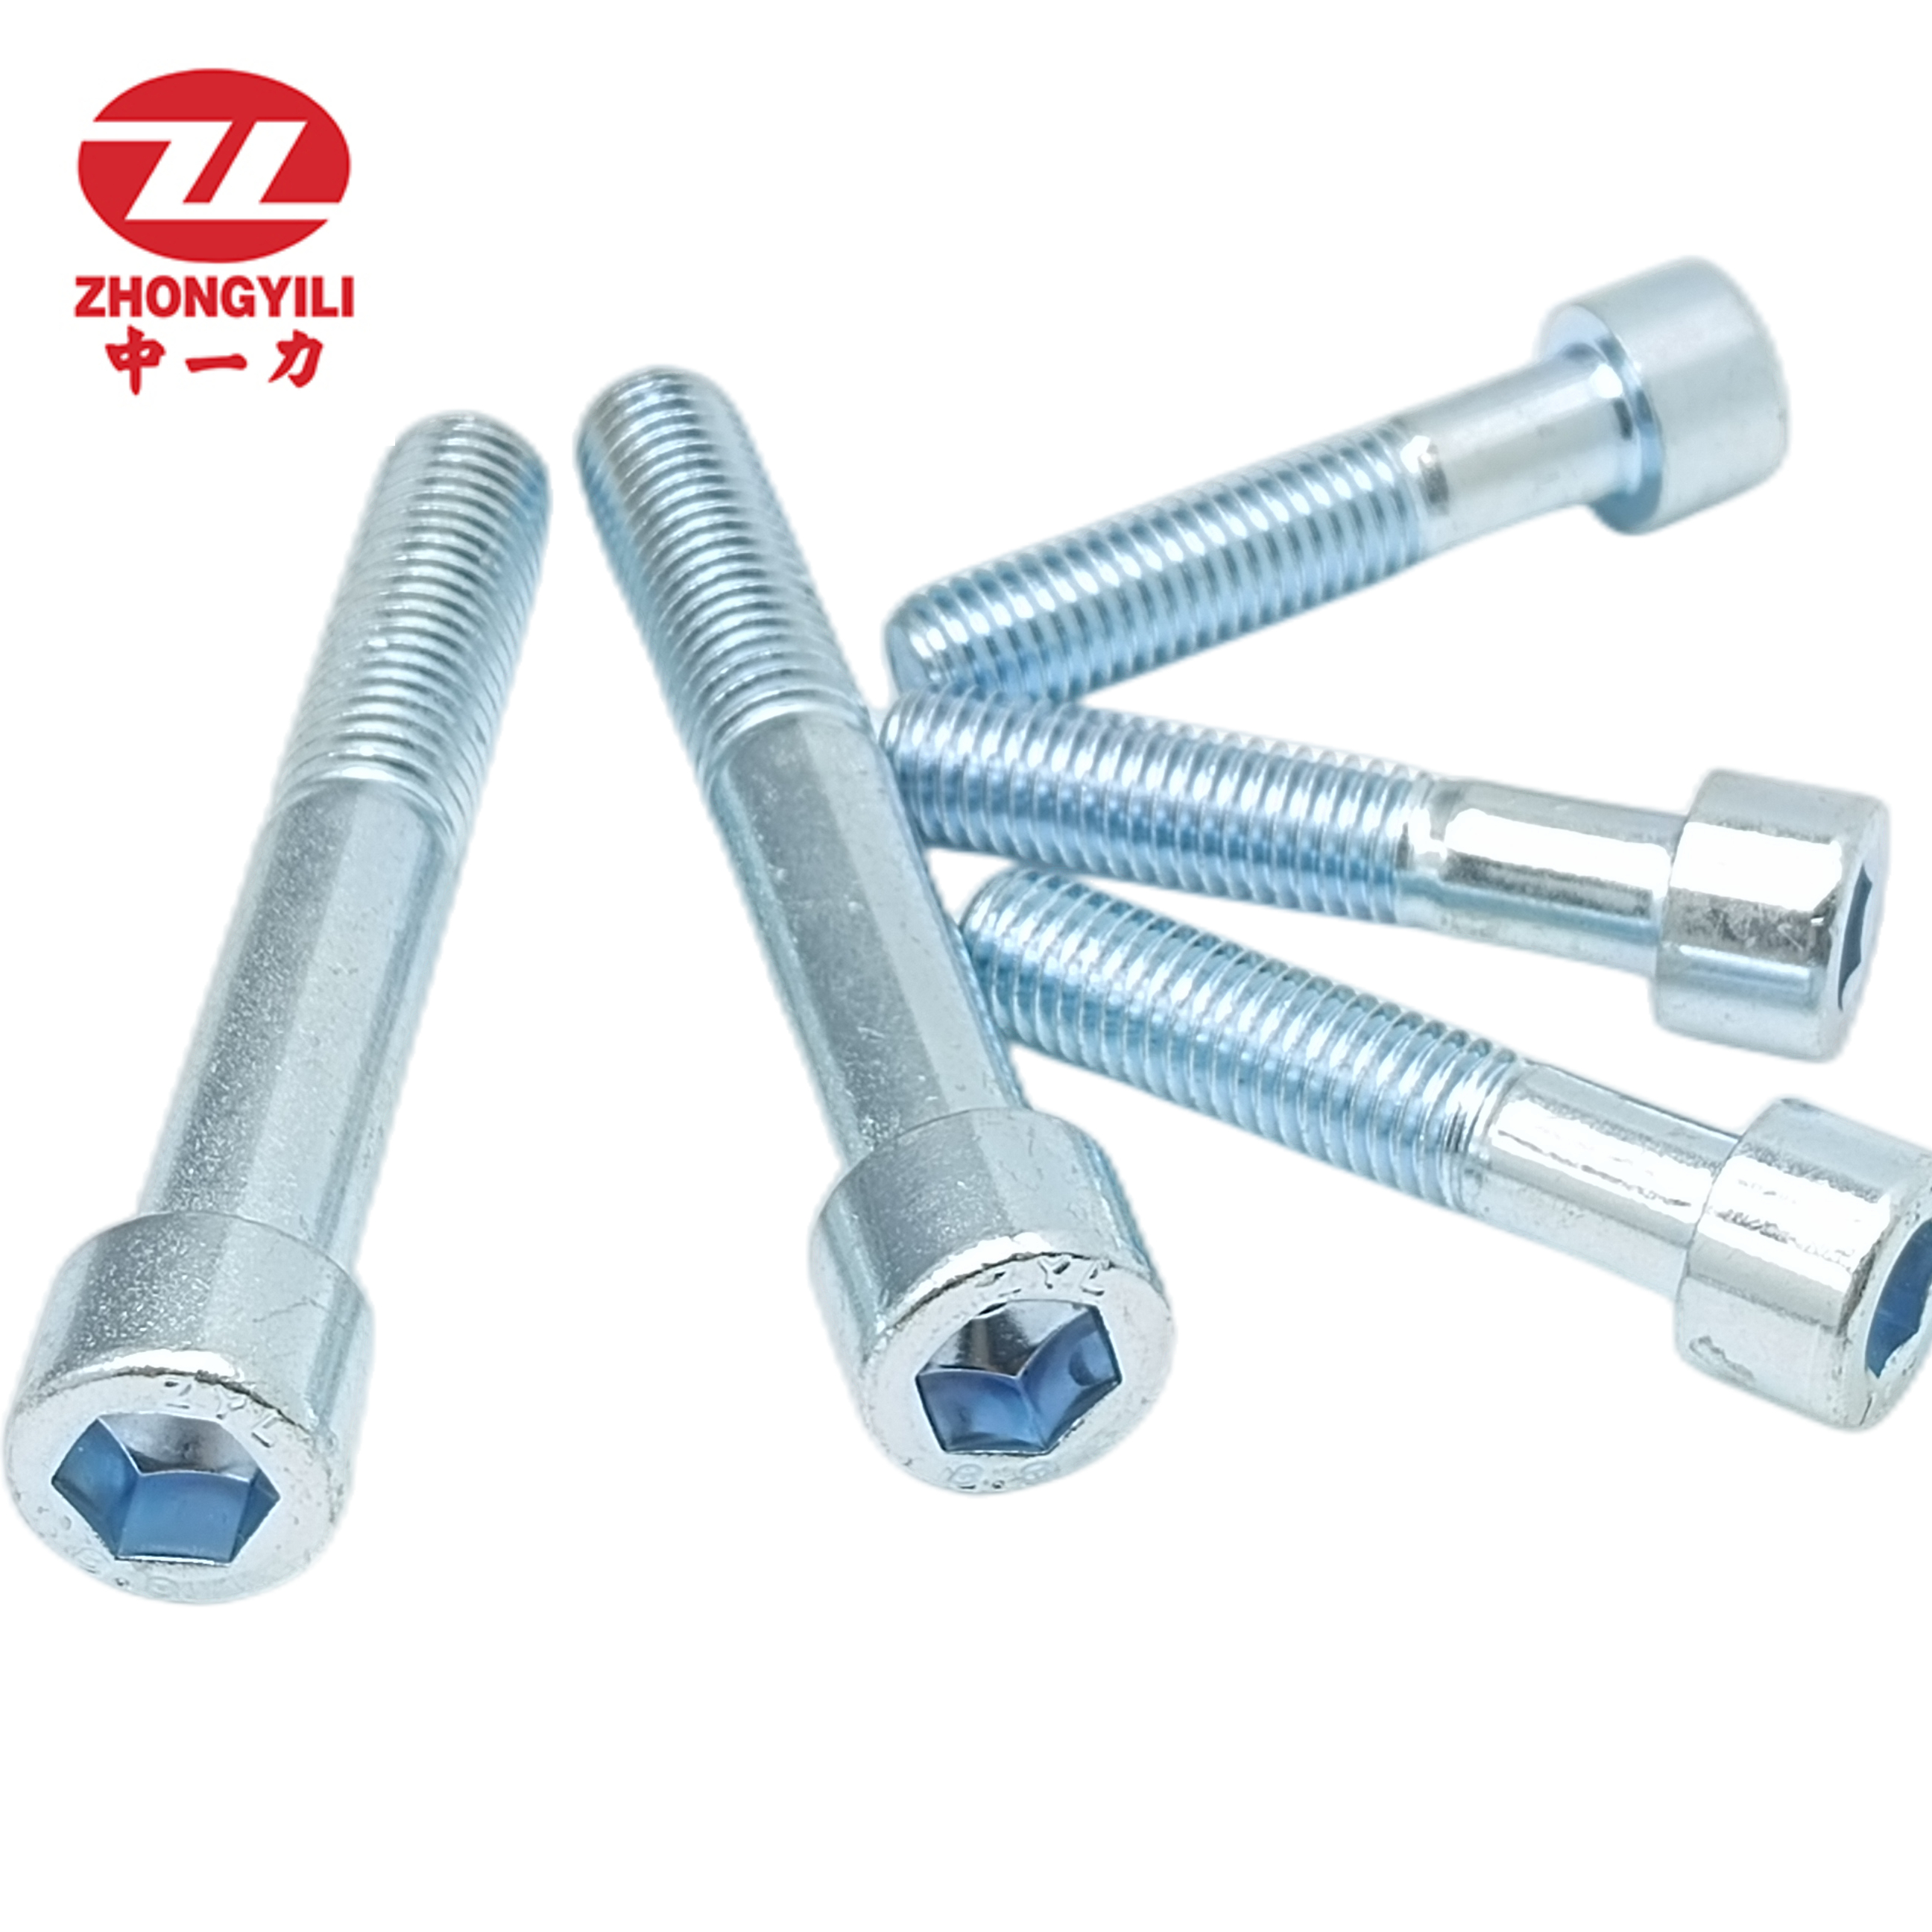 Reliable Supplier China Fastener All Sizes Zinc Plated Factory Price Grade 8.8 10.9 High Strength carbon Steel DIN934 M6 M5 Brass Hexagon Hex Flange Nut and Bolt